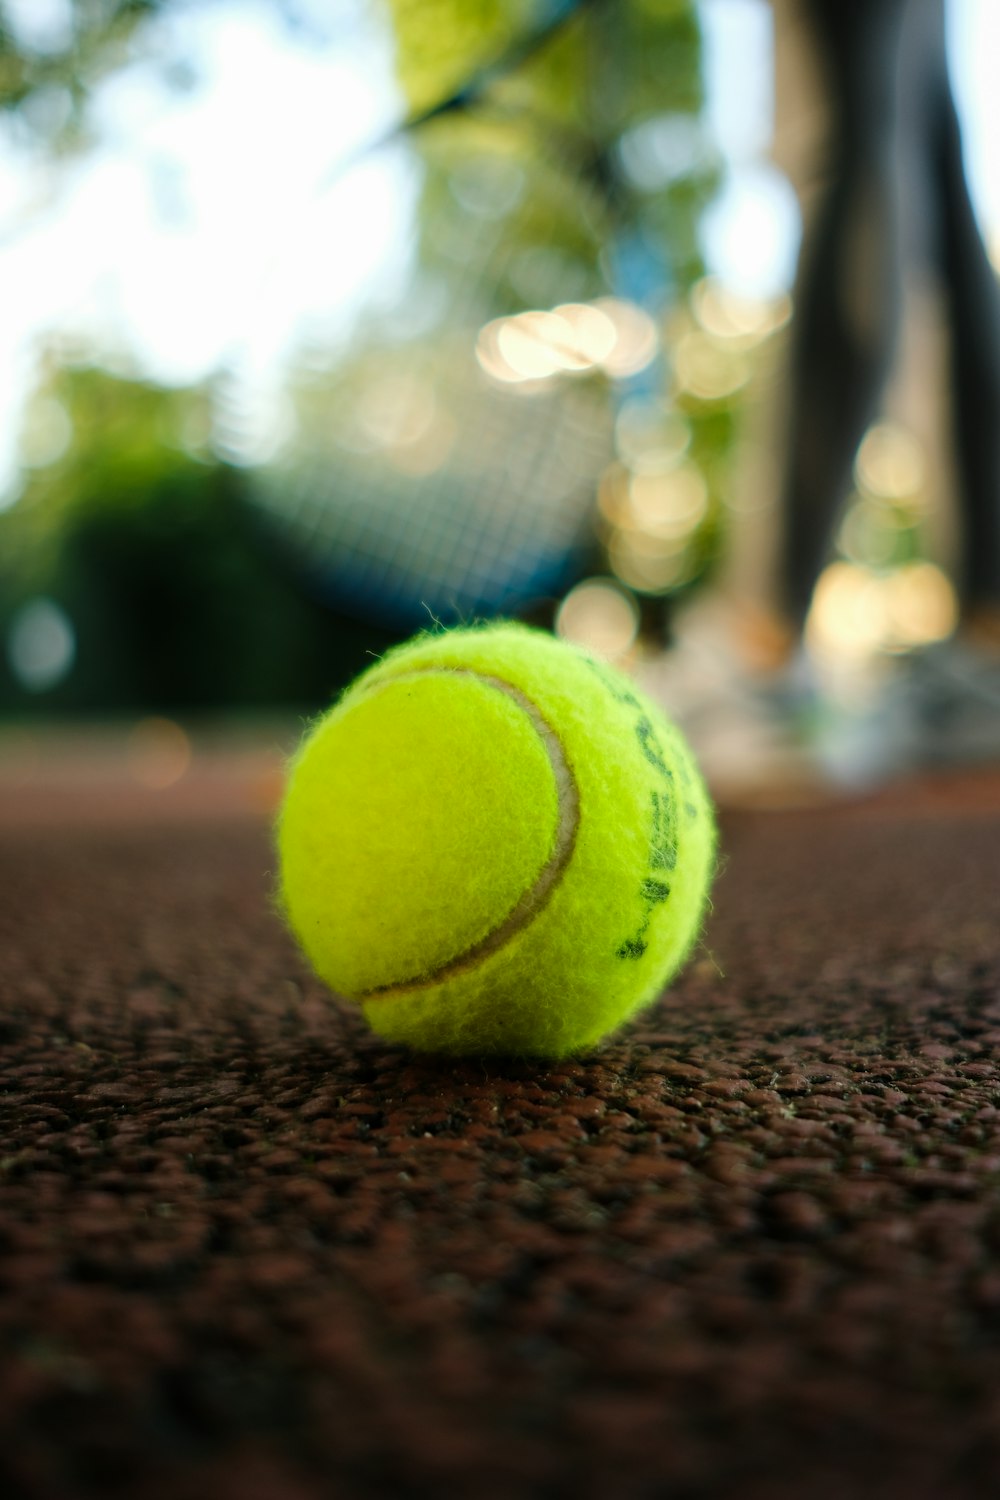 a tennis ball on the ground with a tennis racket in the background